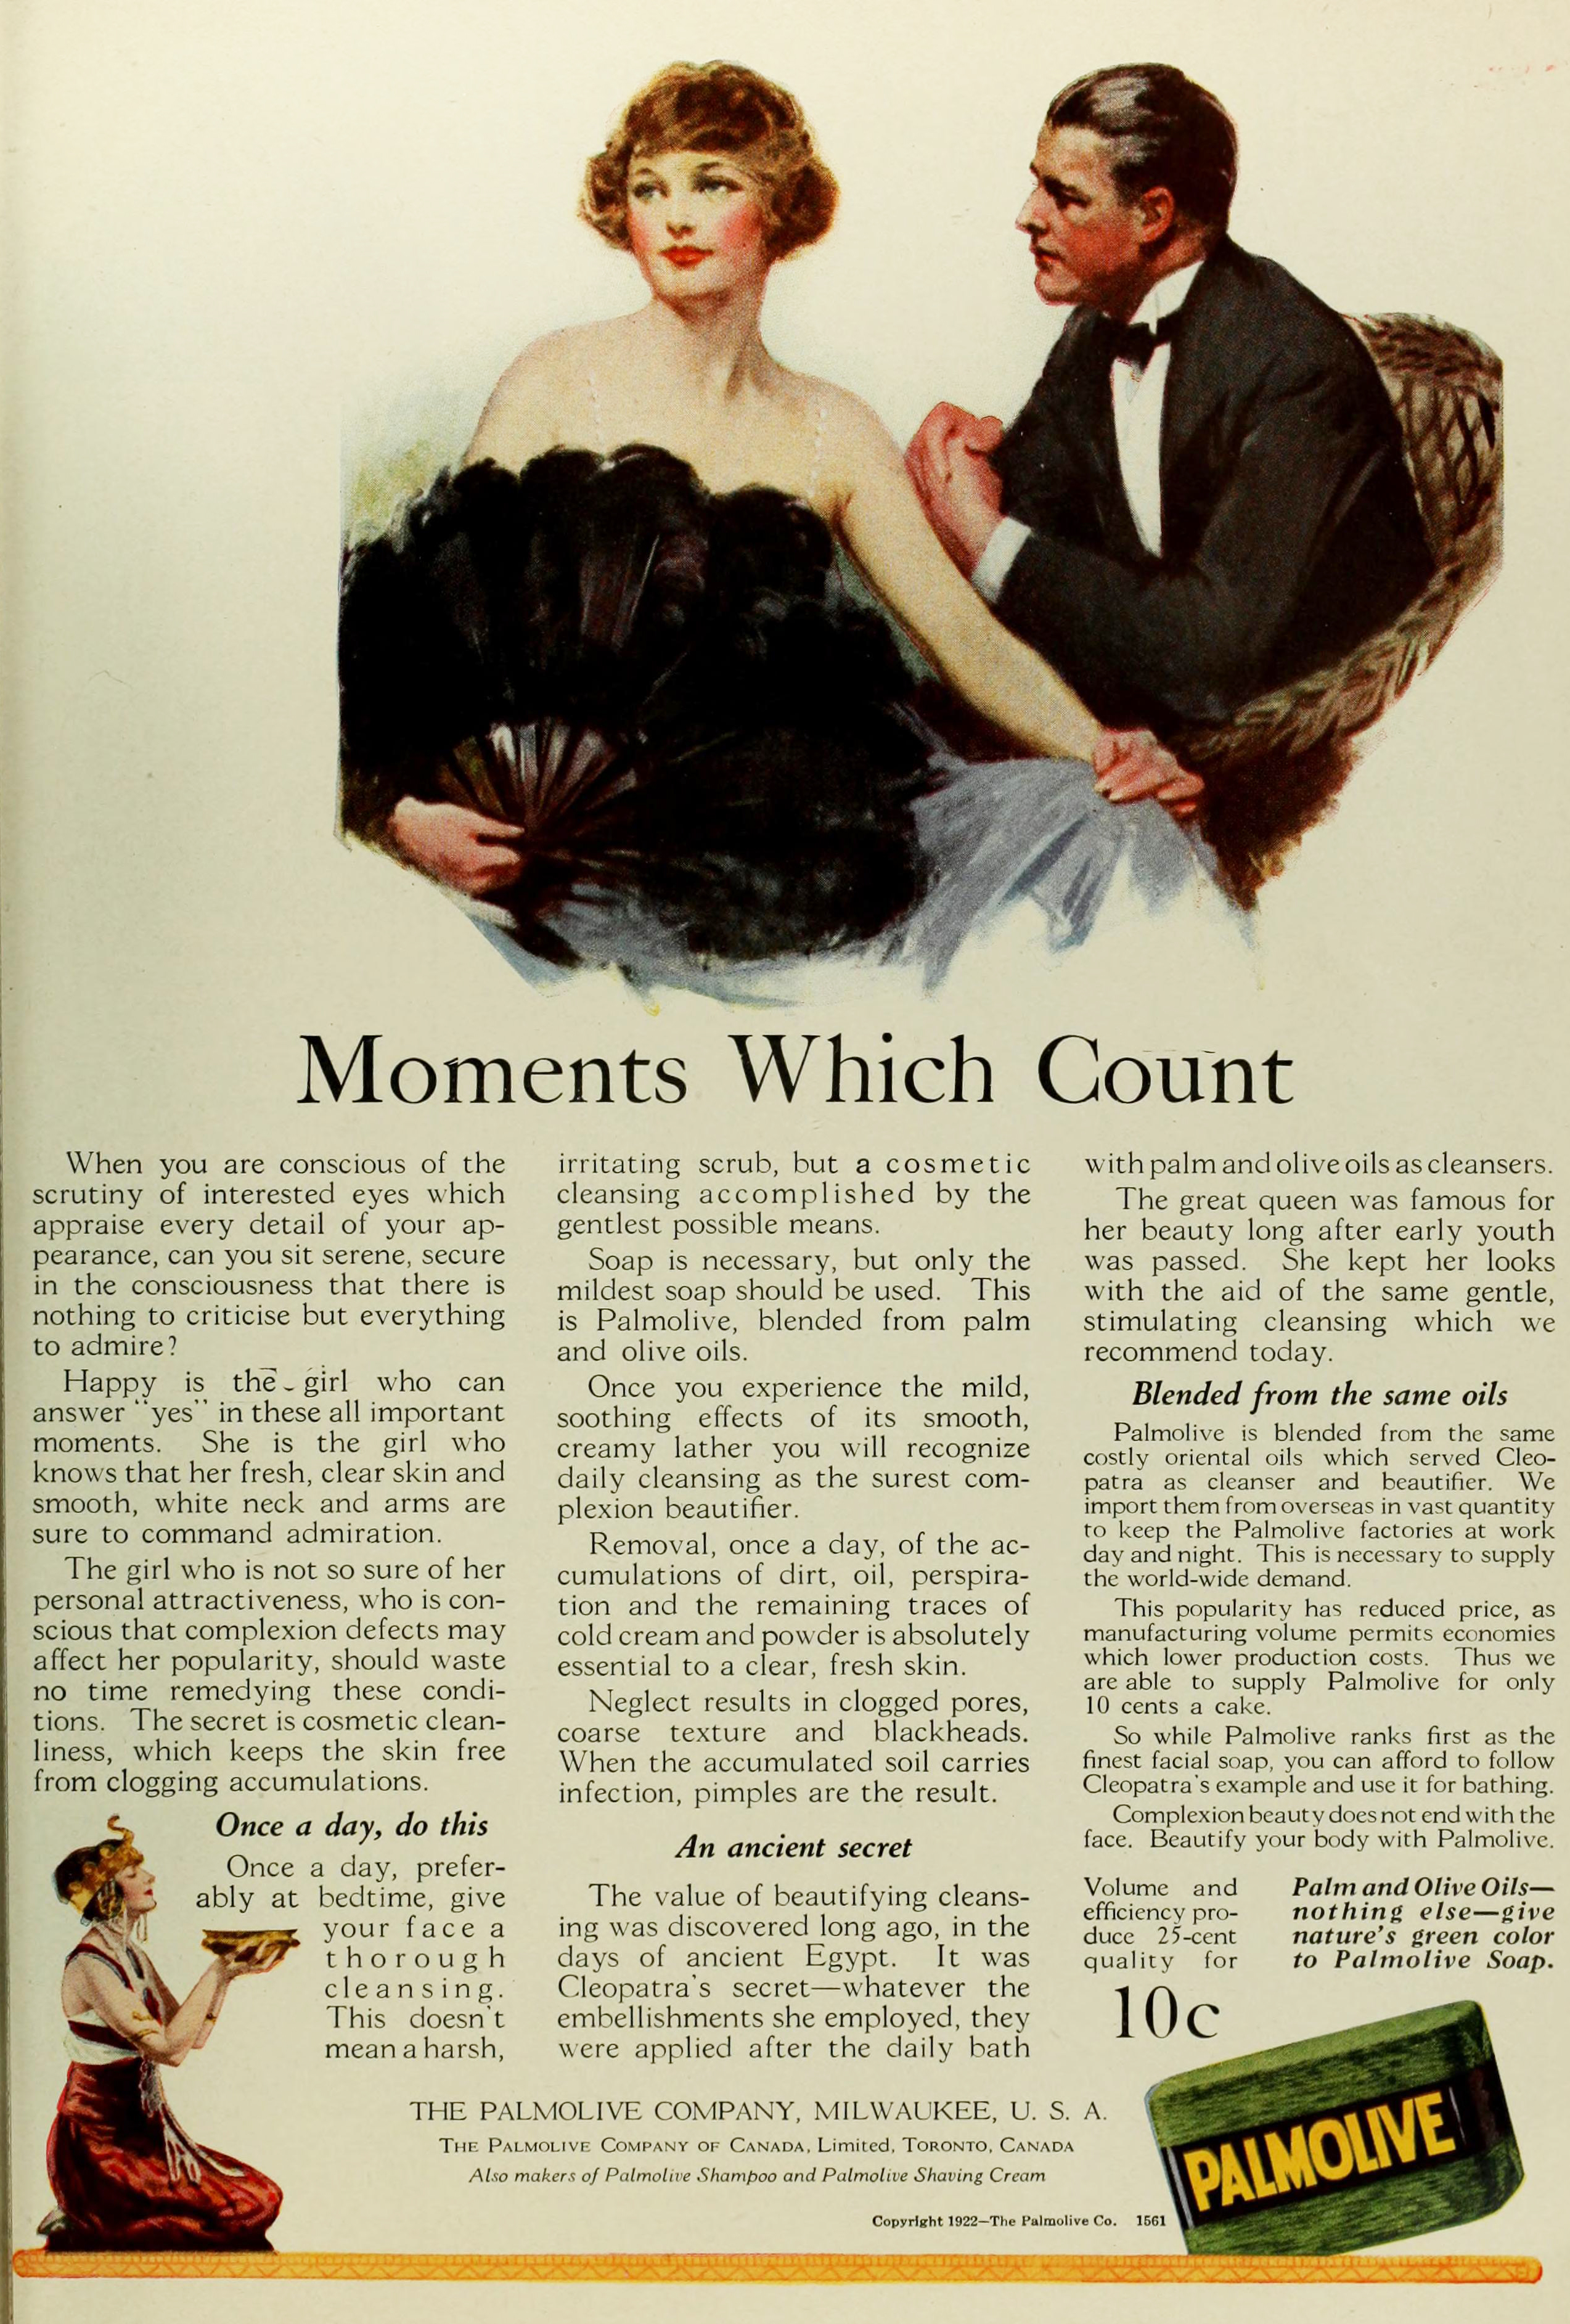 Palmolive Soap Ad Circa 1922  "Moments Which Count"